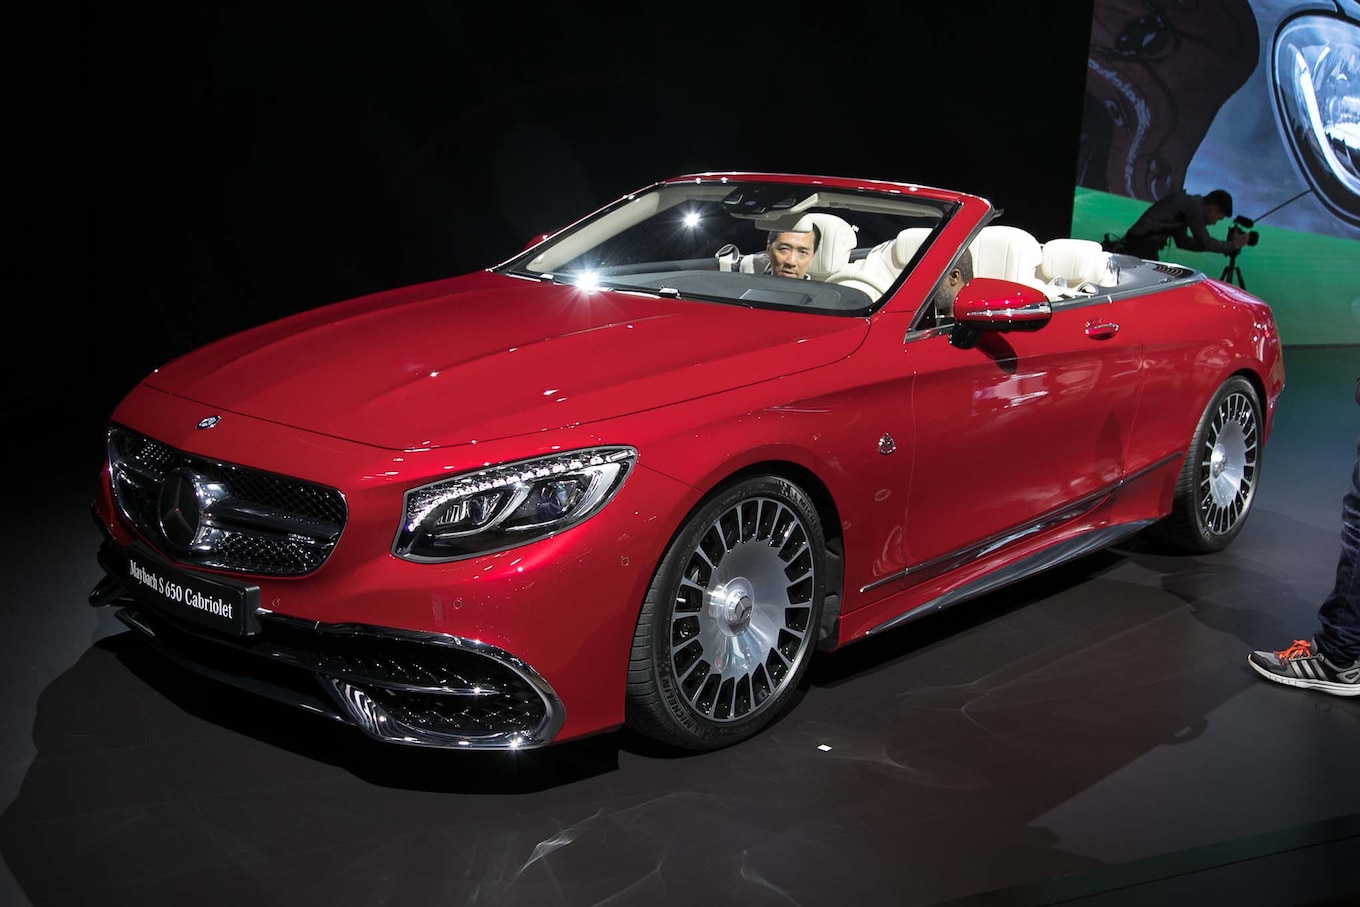 2018 Mercedes Maybach S650 Cabriolet front three quarter 1